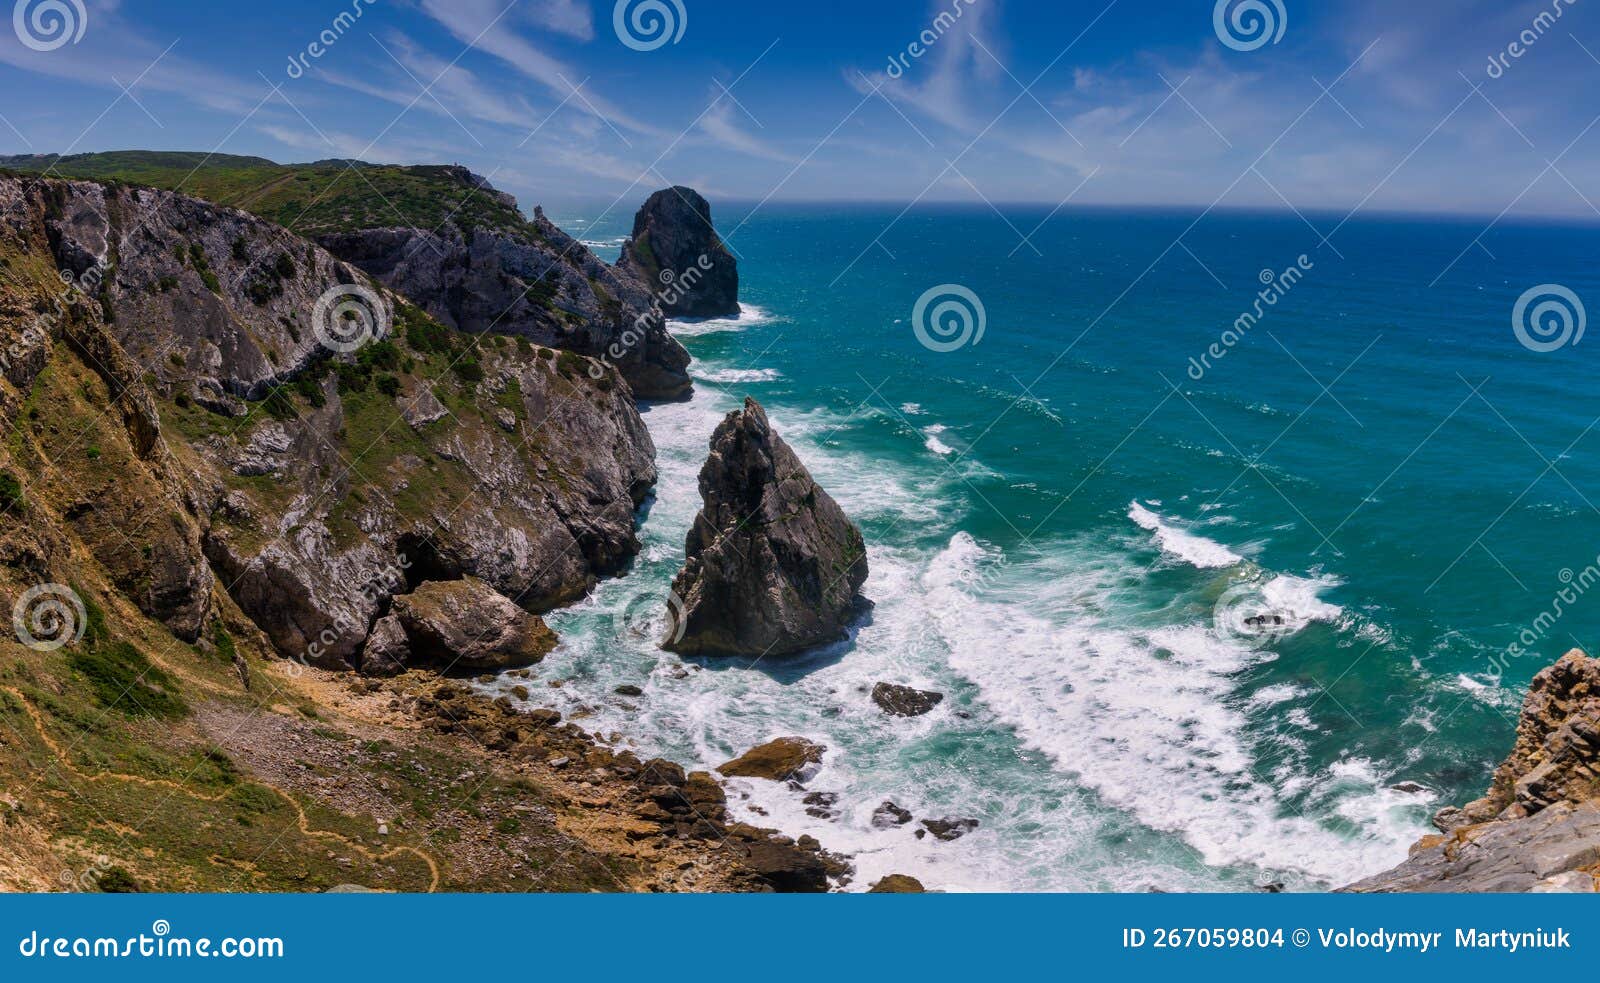 amazing panorama of rocky shore  atlantic ocean. view of high cliffs, foamy waves and sandy beach. sunny summer seascape. portugue